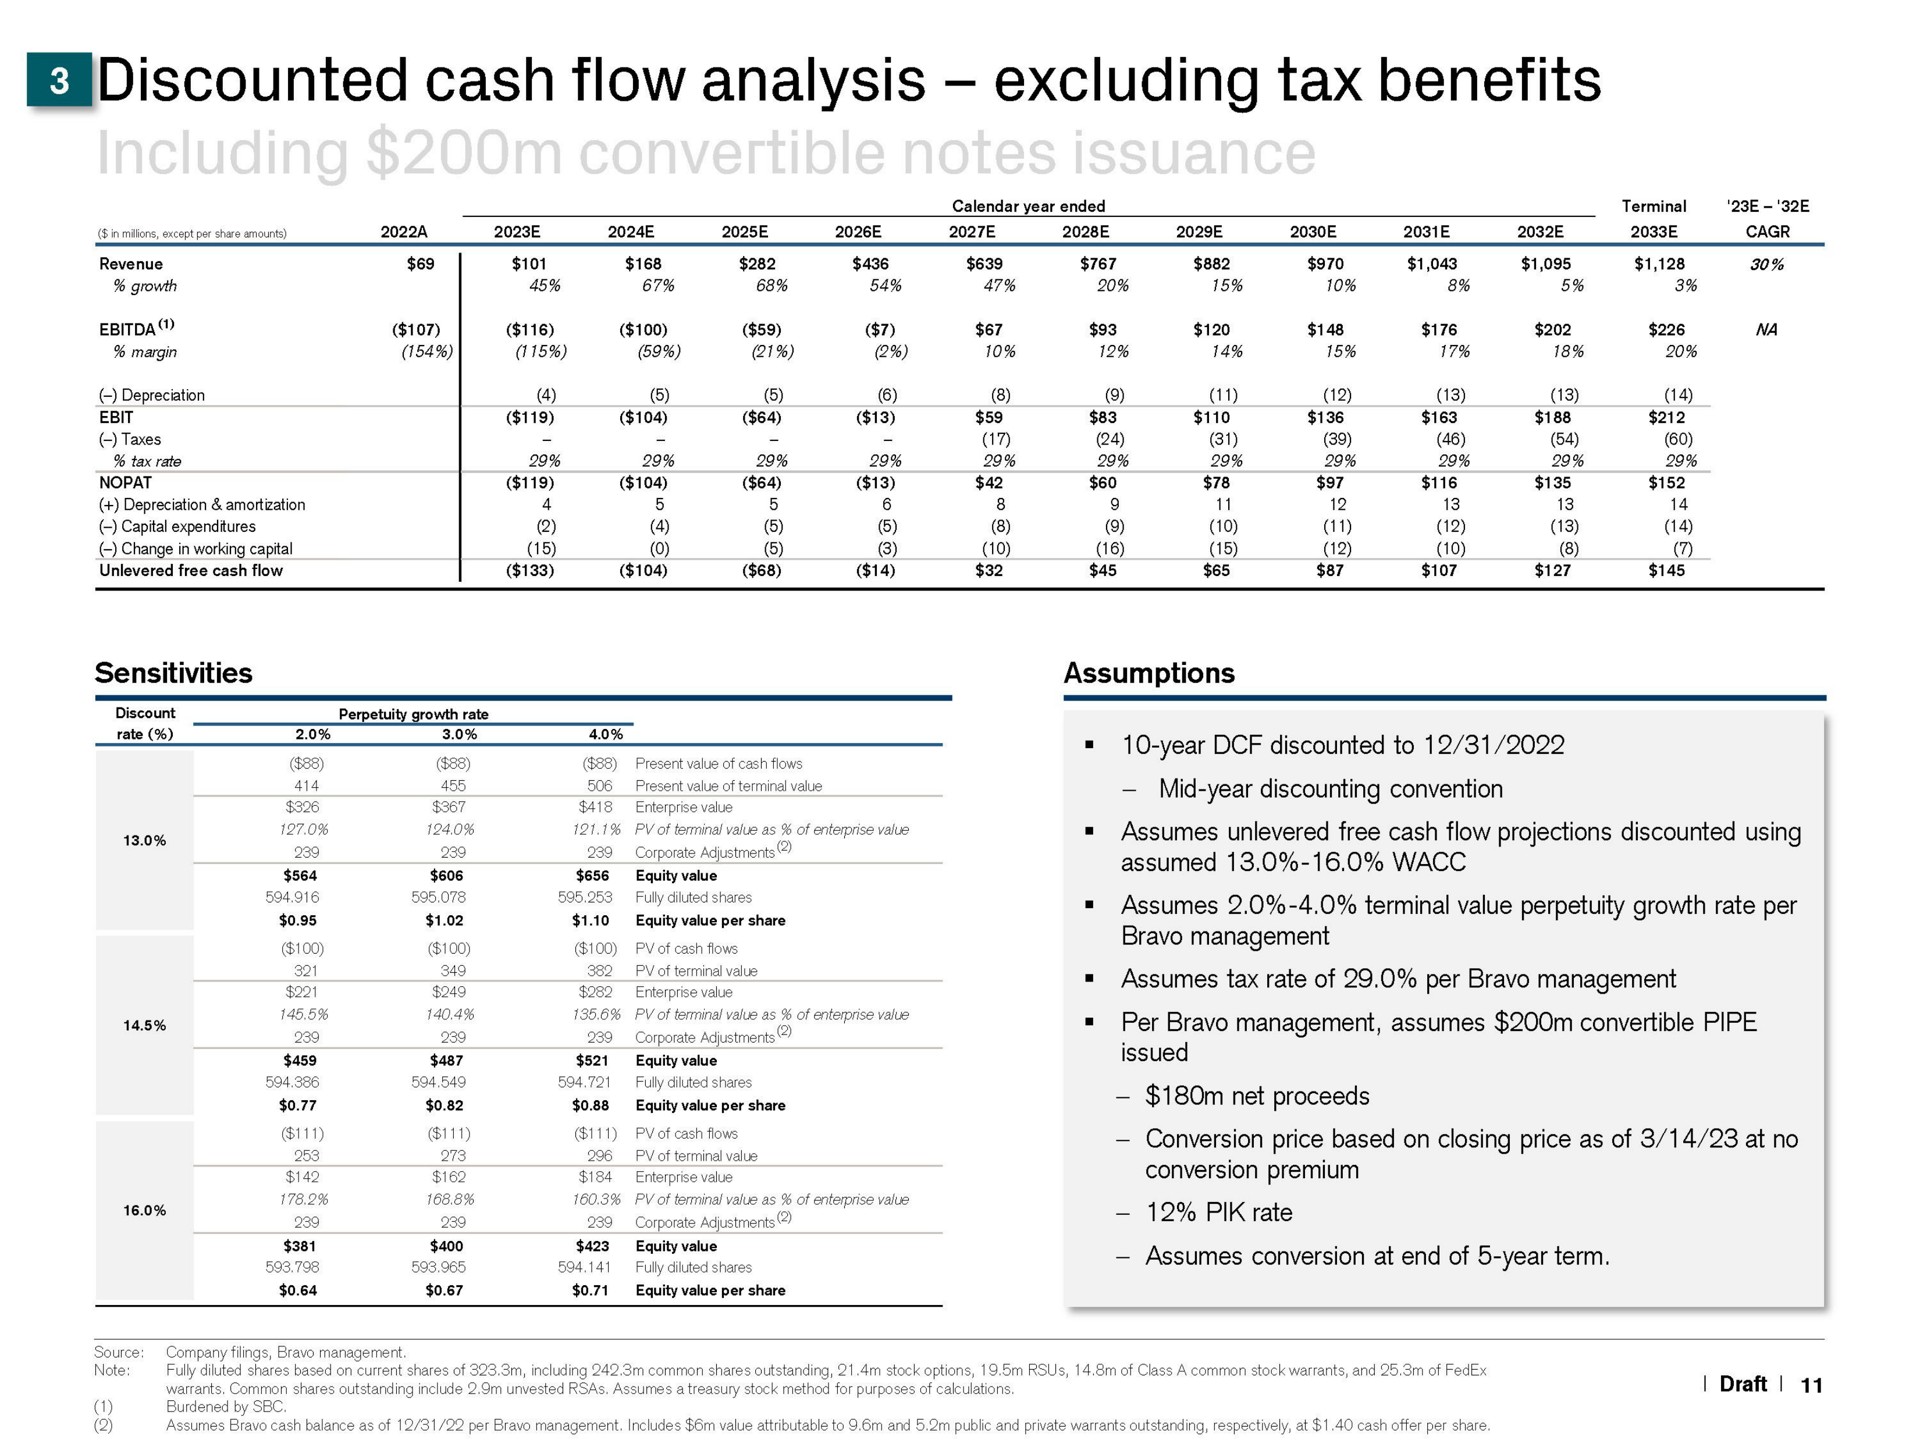 discounted cash flow analysis excluding tax benefits sees year discounted to assumes terminal value perpetuity growth rate per git conversion price based on closing price as of at no | Credit Suisse